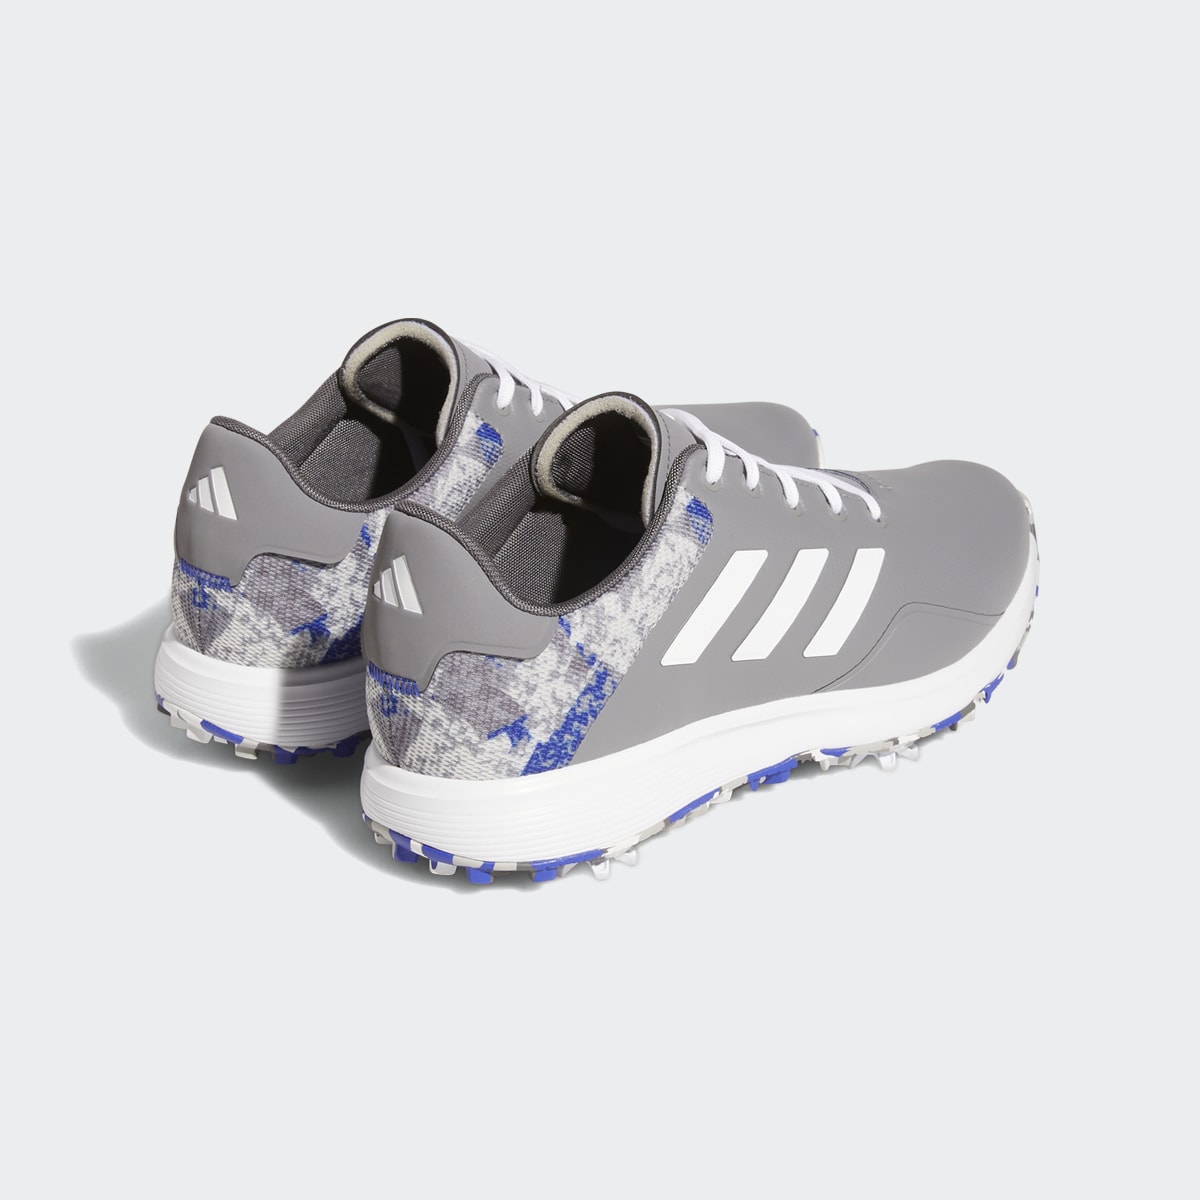 Adidas S2G Golf Shoes. 5